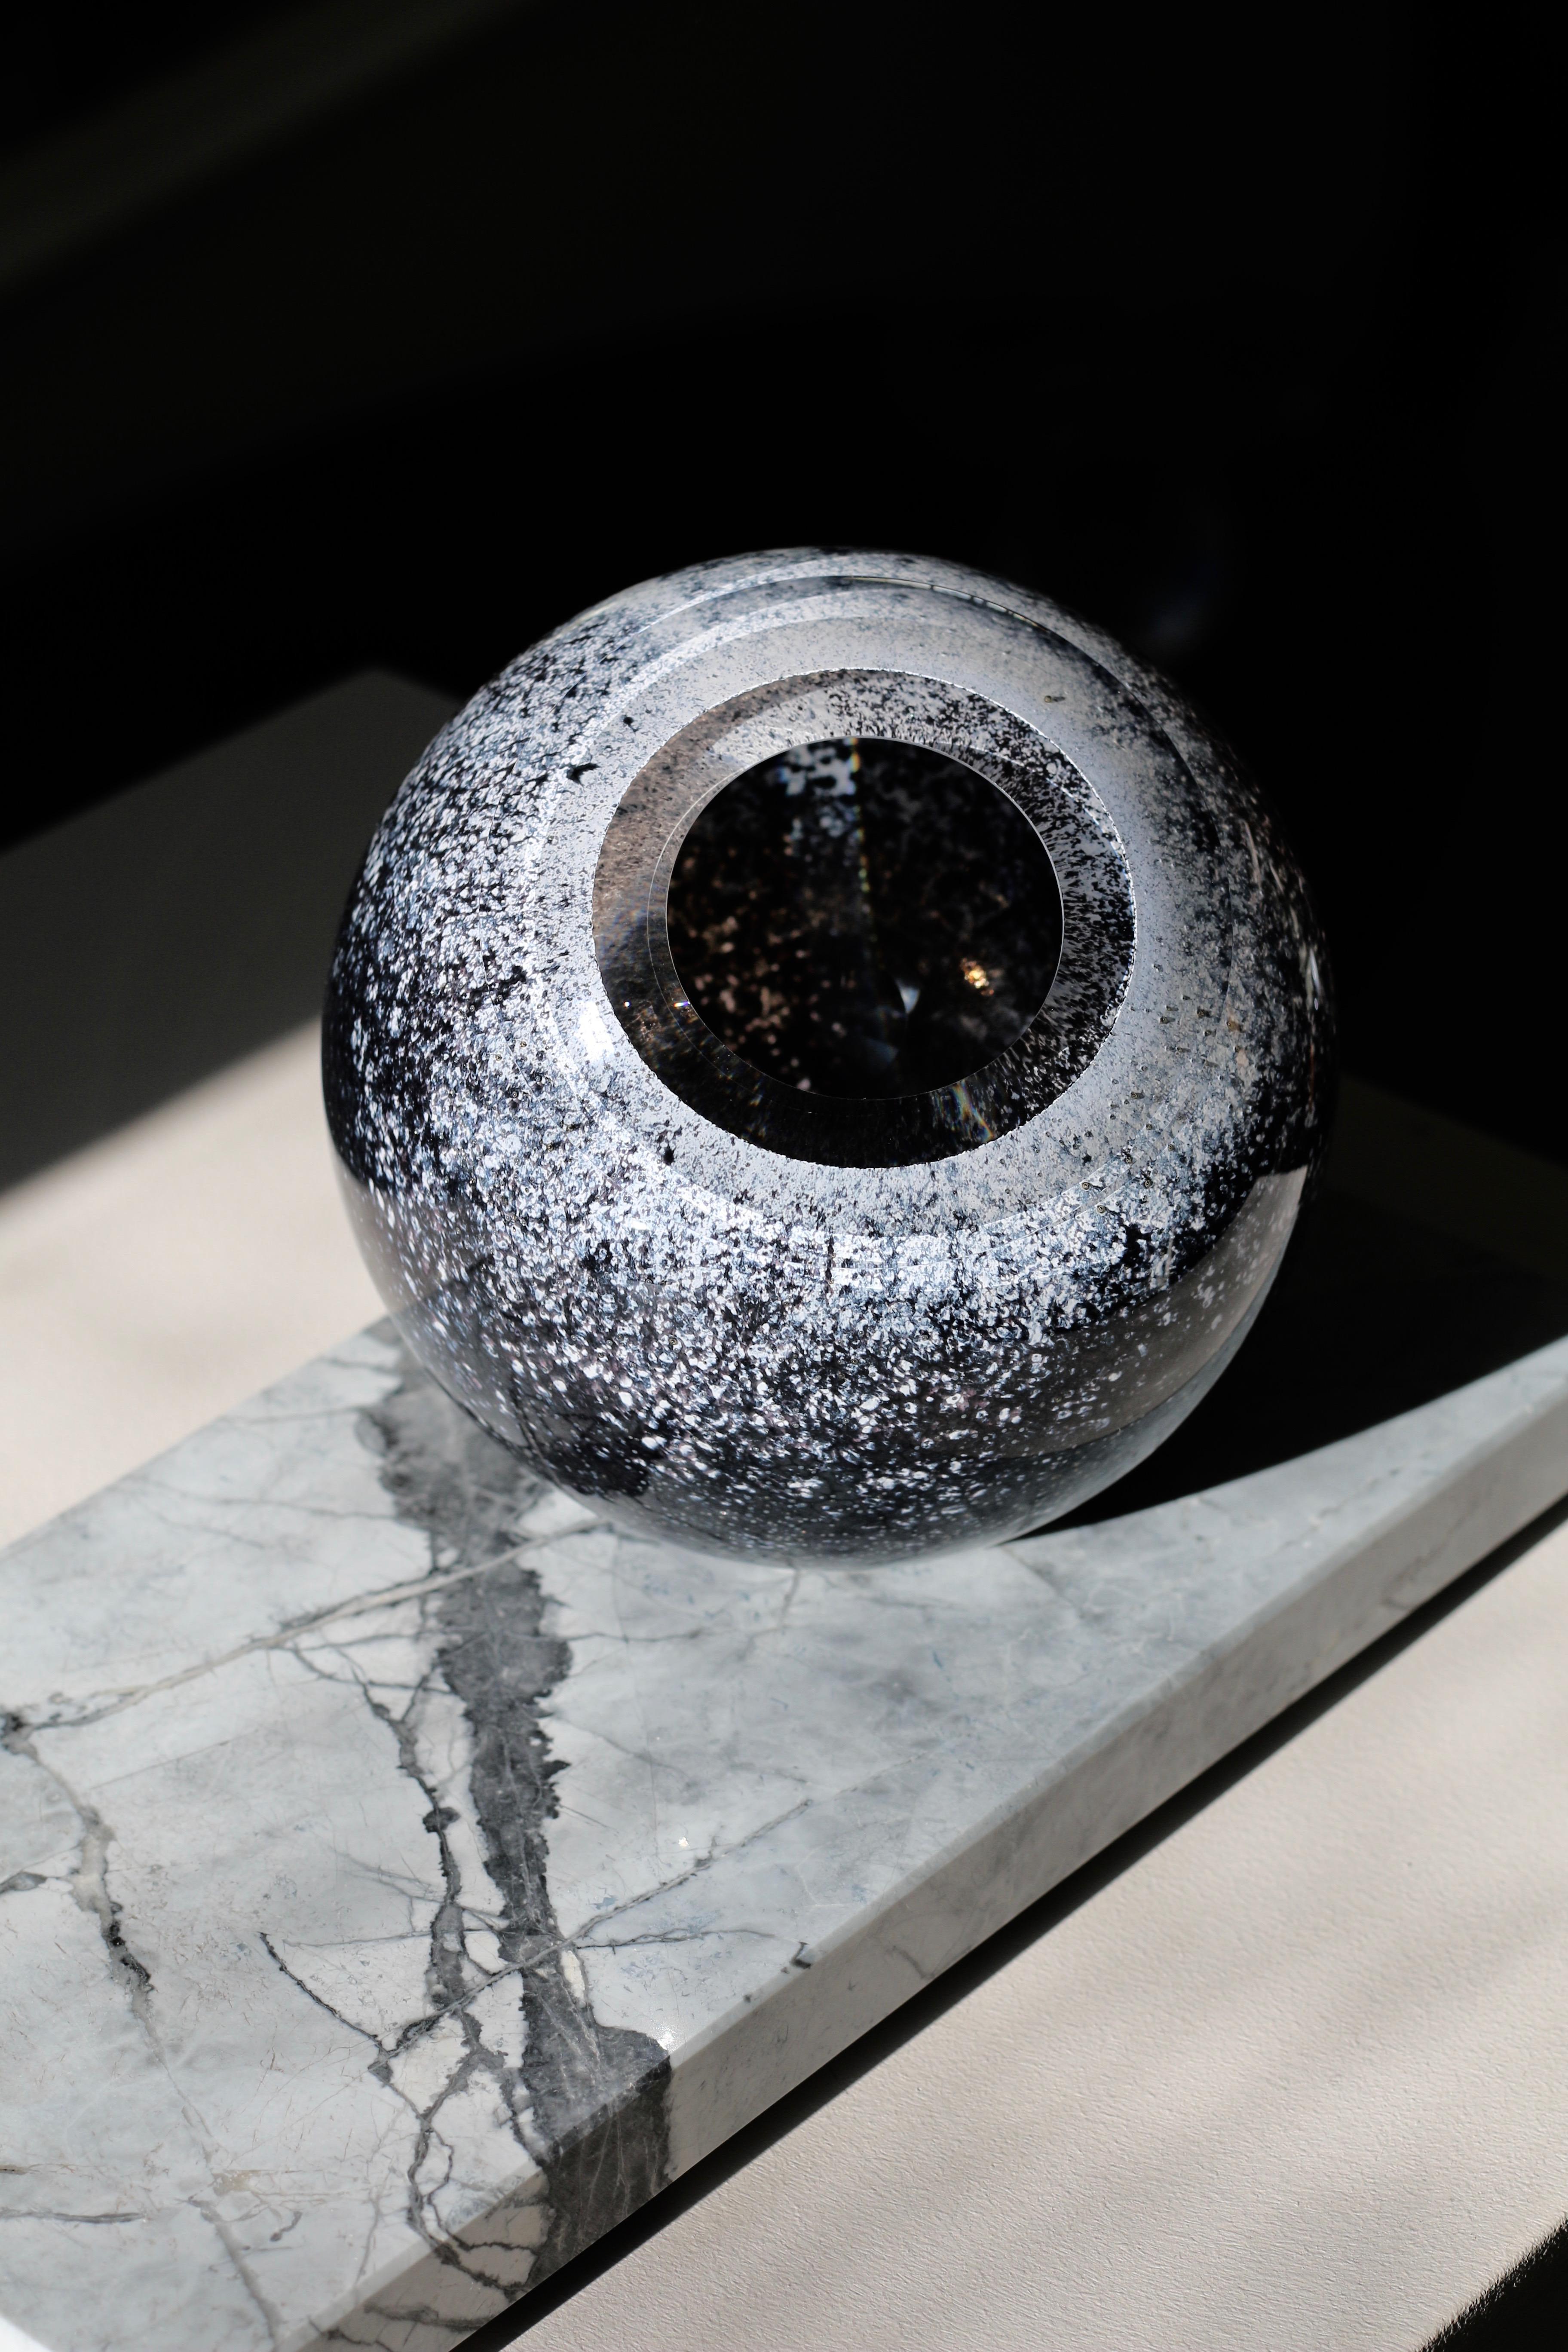 'Arctica' small sculptural vase
from collection 'Mother Eternity'
mouth blown glass in dark blue and snow white
Côte d'Azur marble
Handcrafted
top quality, extra clear glass
unique item, signed

Vase is composed of two details: glass sphere that is